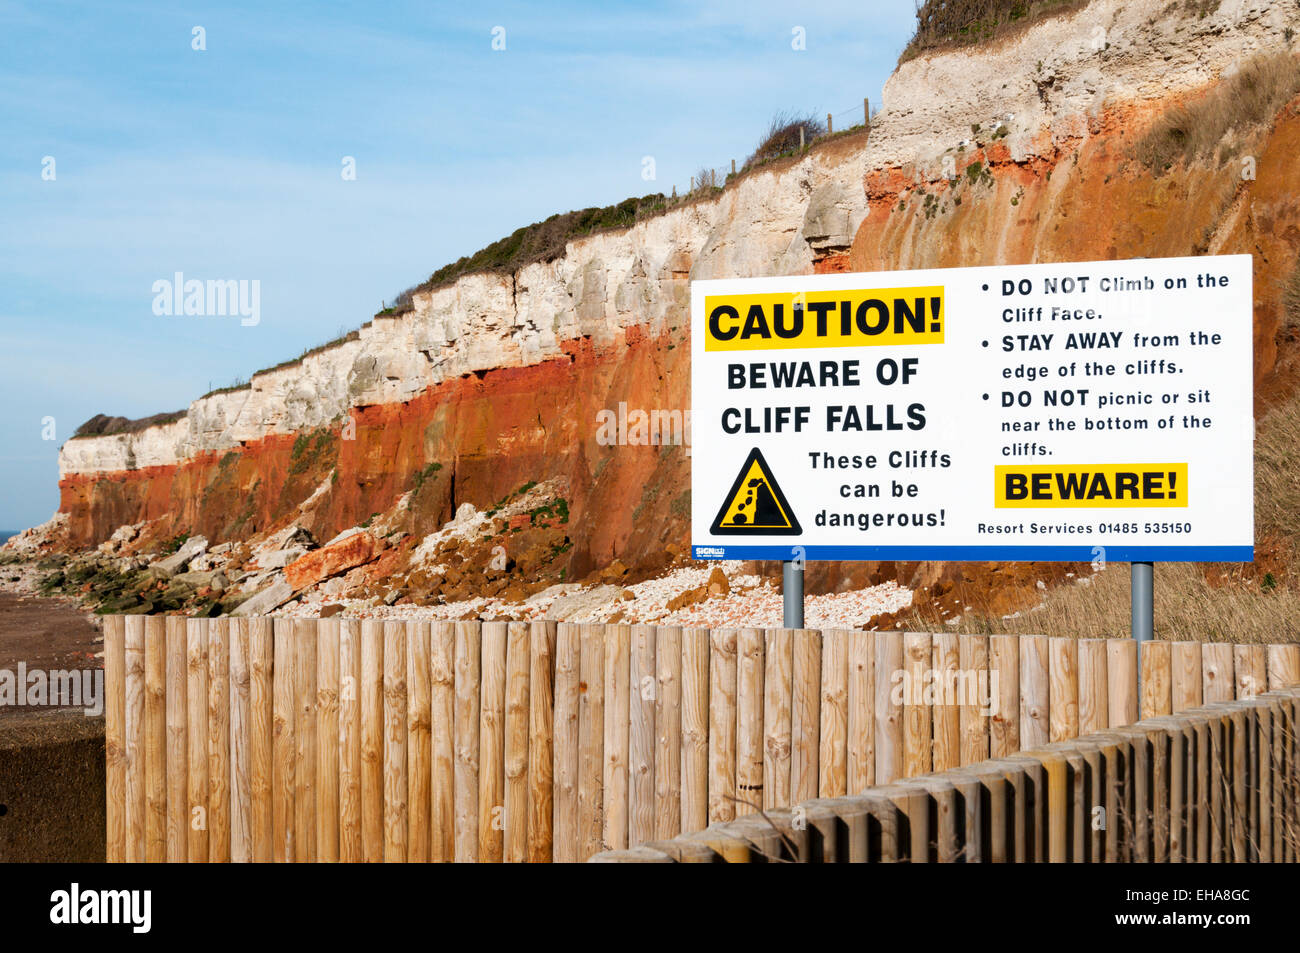 A sign warning of cliff falls in front of the red and white banded cliffs of Hunstanton on the Norfolk coast, England. Stock Photo